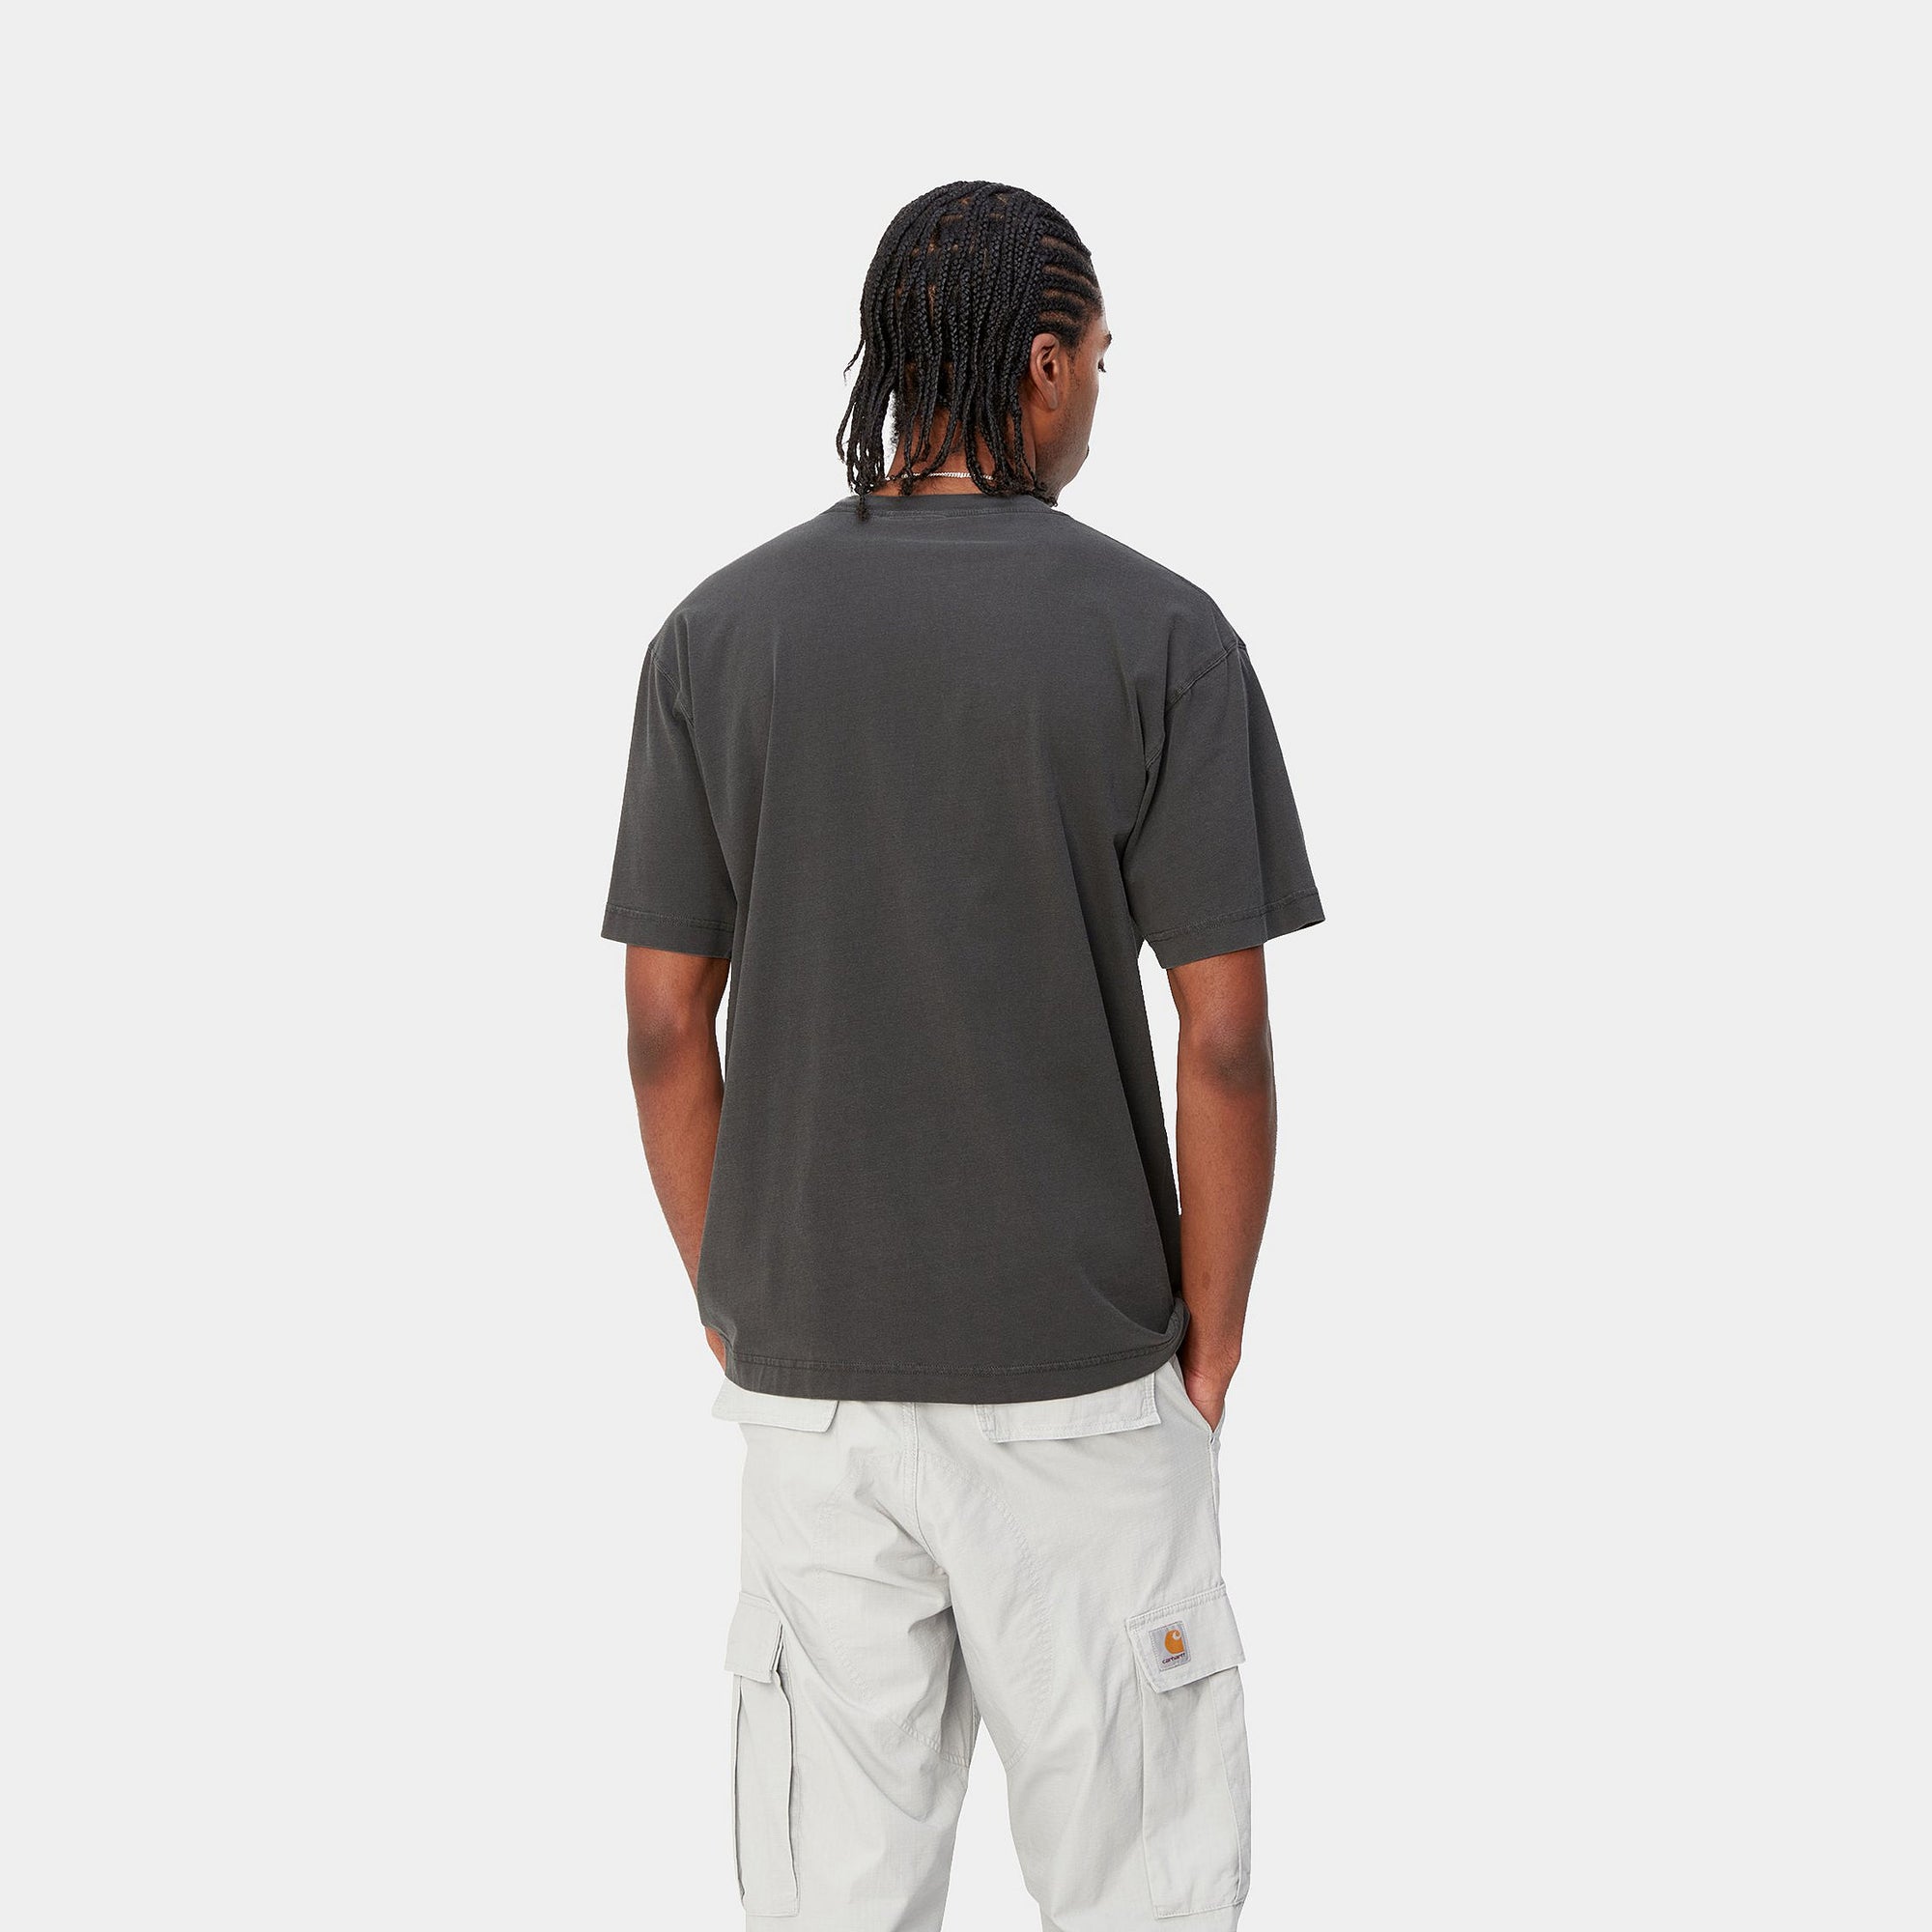 S/S DUNE T-SHIRT - Charcoal (garment dyed)